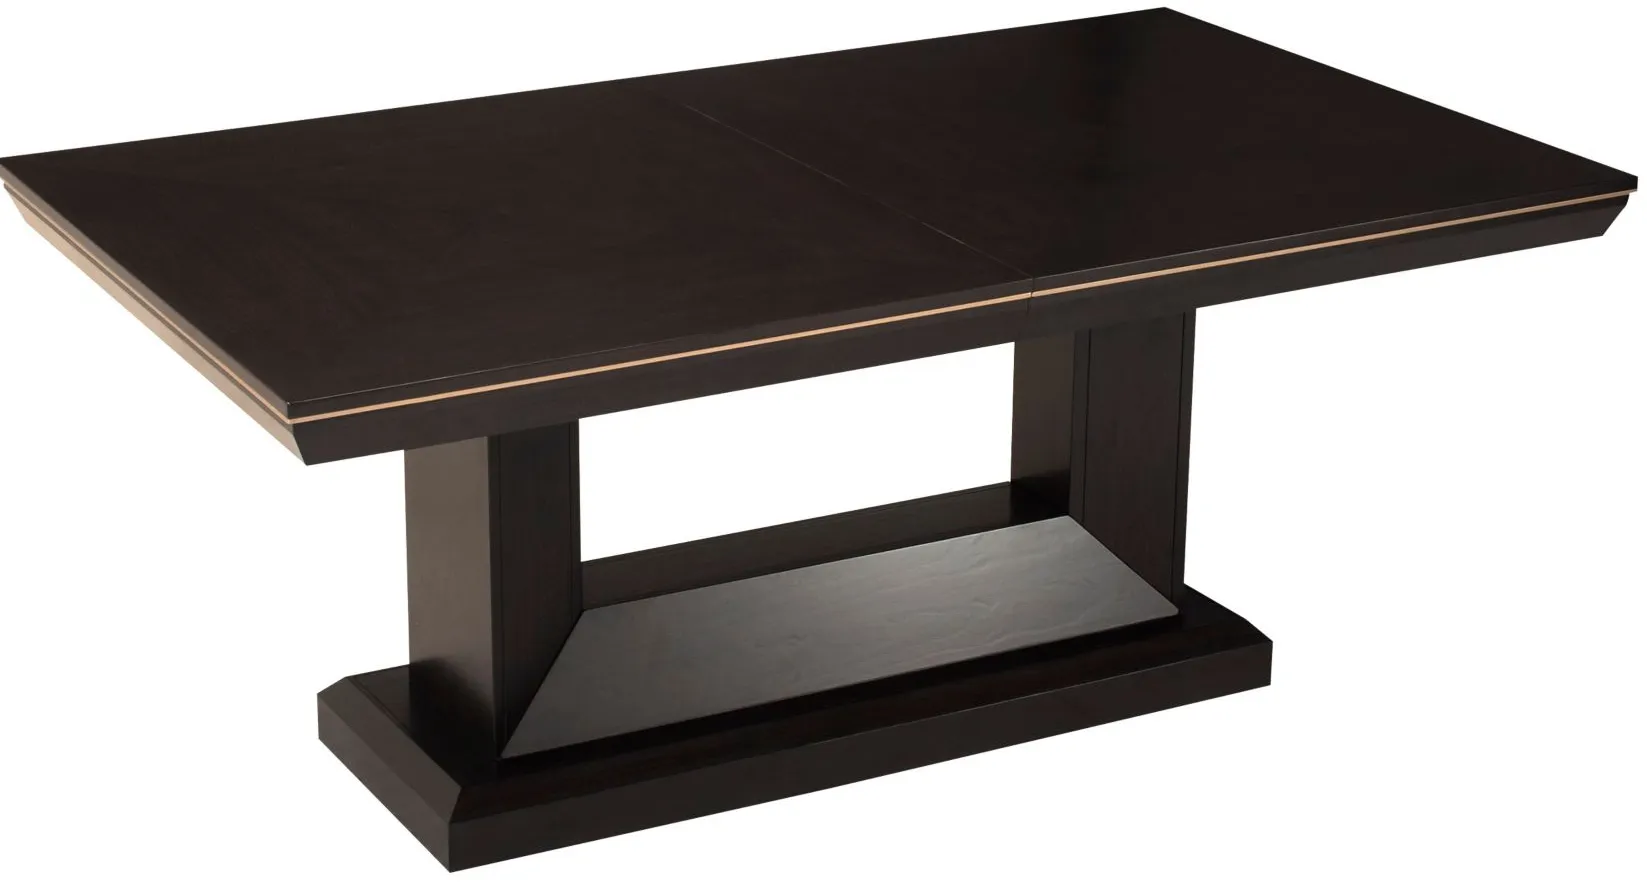 Callister Dining Table w/ Leaf in Chocolate by Najarian